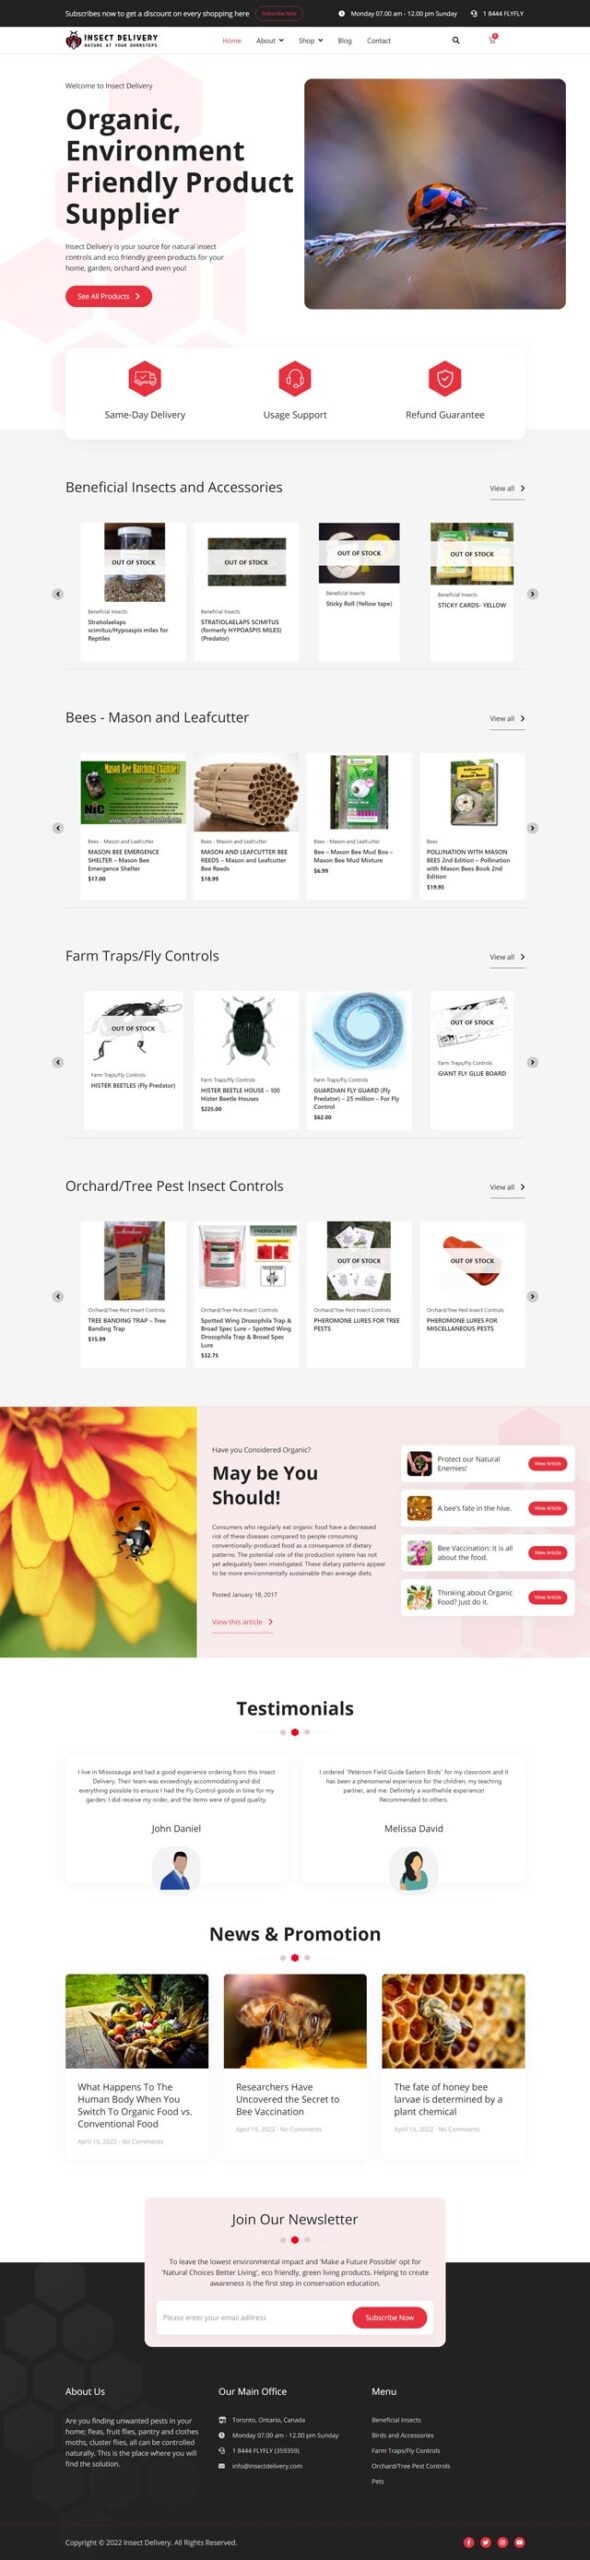 insectdelivery.com - Homepage